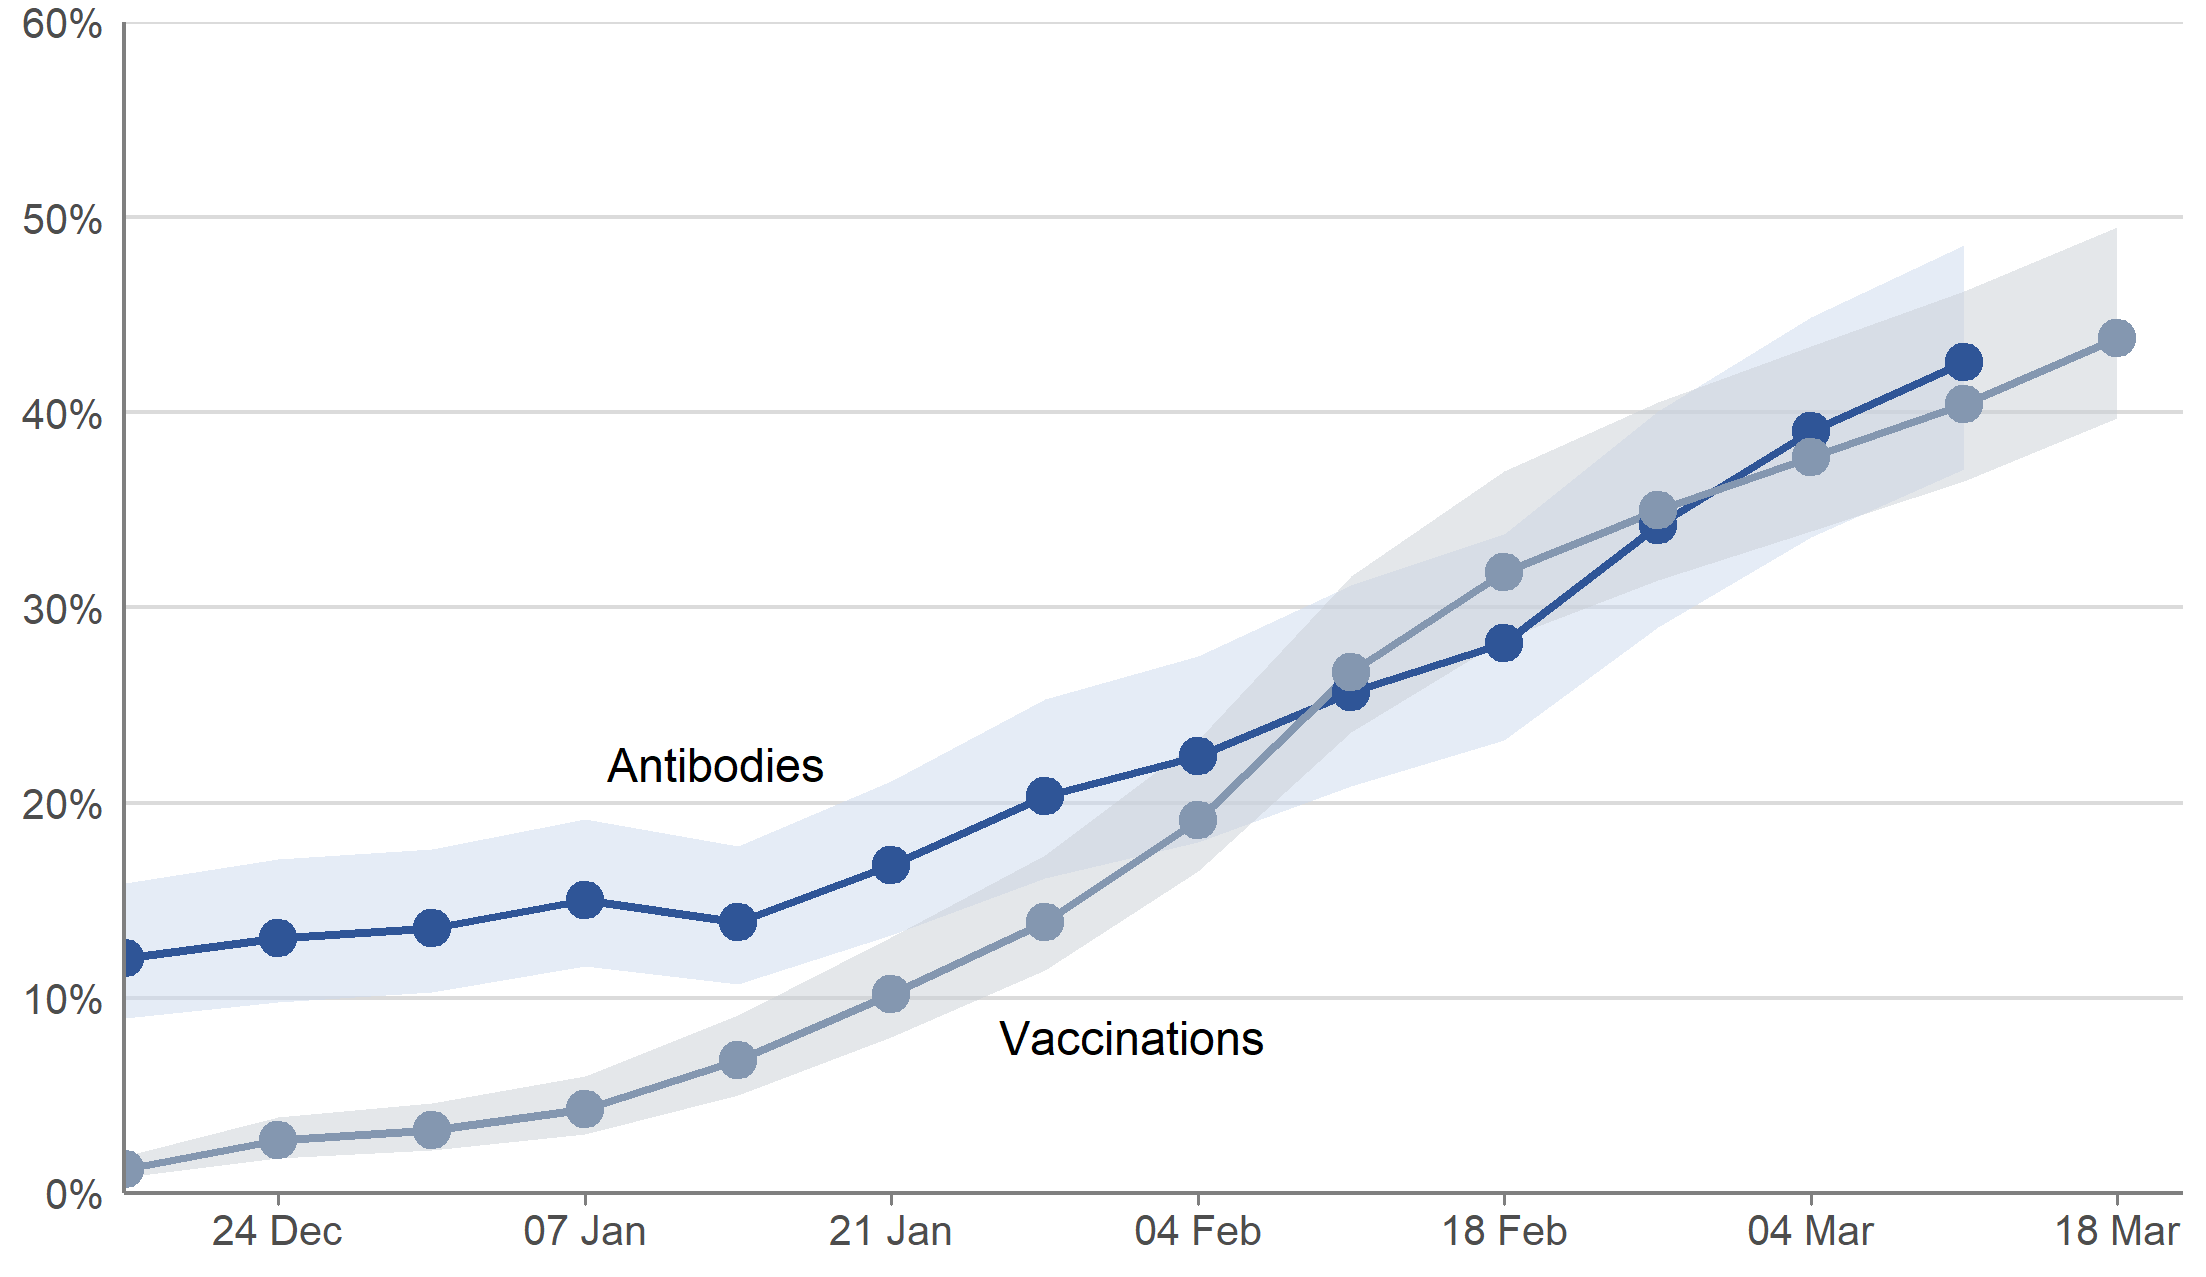 The chart shows modelled weekly estimates of percentage of people that have received one or more doses of a COVID-19 vaccine, from 14 December 2020 to 20 March 2021 and modelled weekly percentages of people testing positive for antibodies to SARS-CoV-2 from a blood sample, from 7 December 2020 to 14 March 2021, including 95% credible intervals. The vaccination estimates are based on self-reported survey data, and should not be used to monitor the progress of the vaccine rollout.